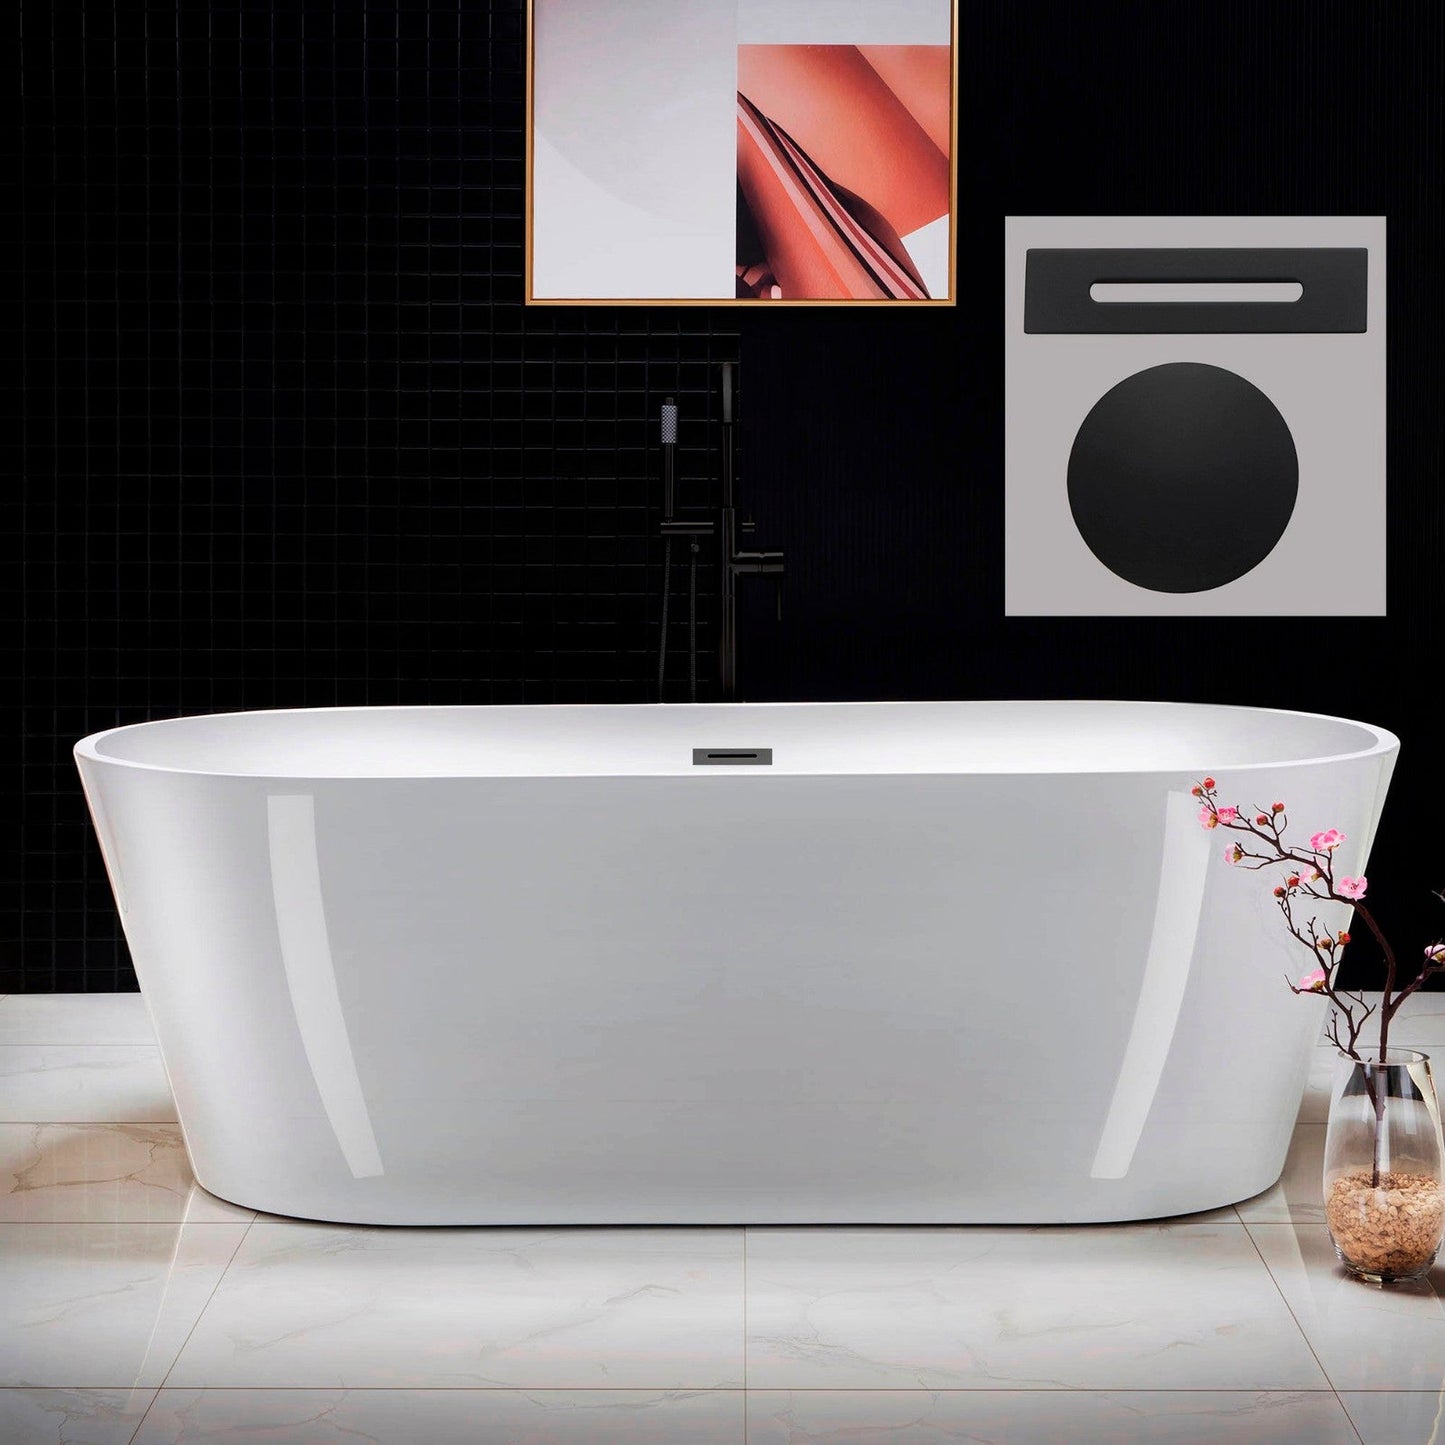 WoodBridge 71" White Acrylic Freestanding Contemporary Soaking Bathtub With Matte Black Drain, Overflow, F0006MBRD Tub Filler and Caddy Tray